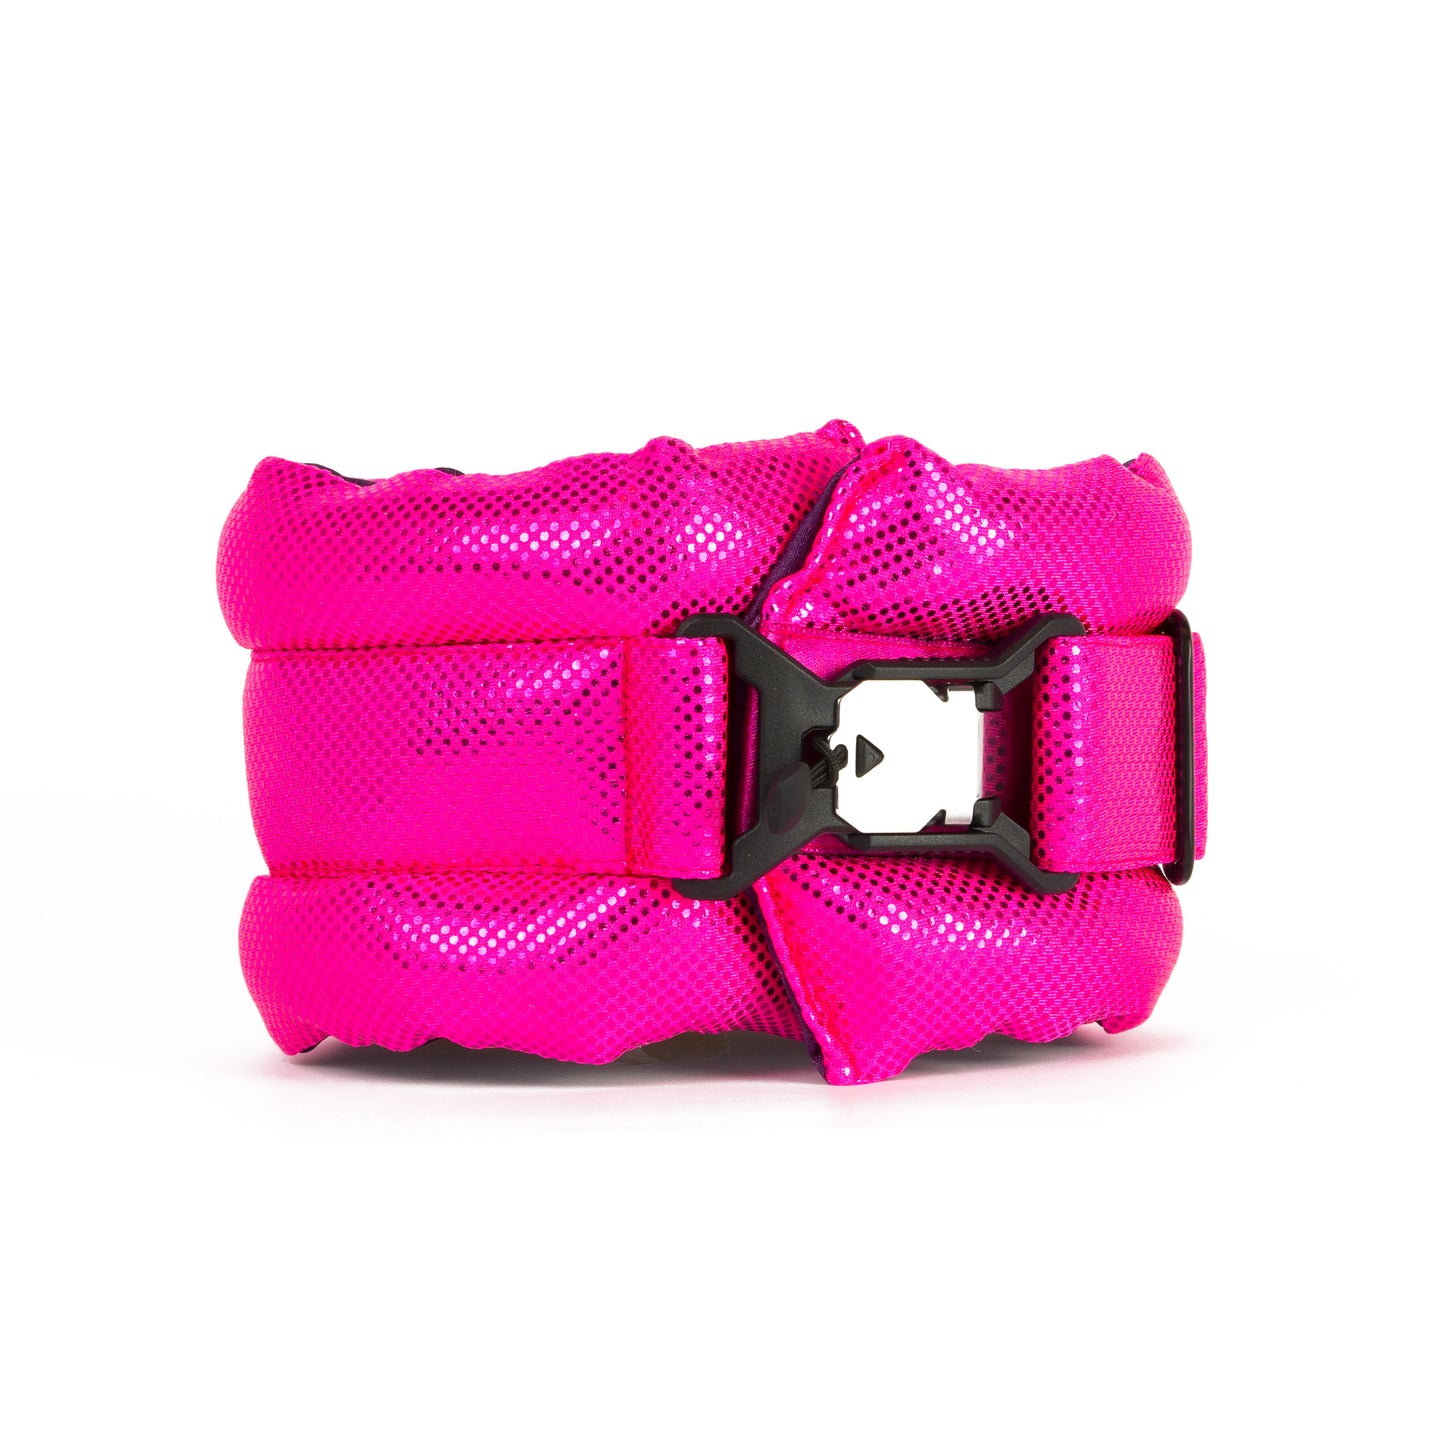 Standard Fluffy Magnetic Collar Metallic Ultra Neon Pink with Black